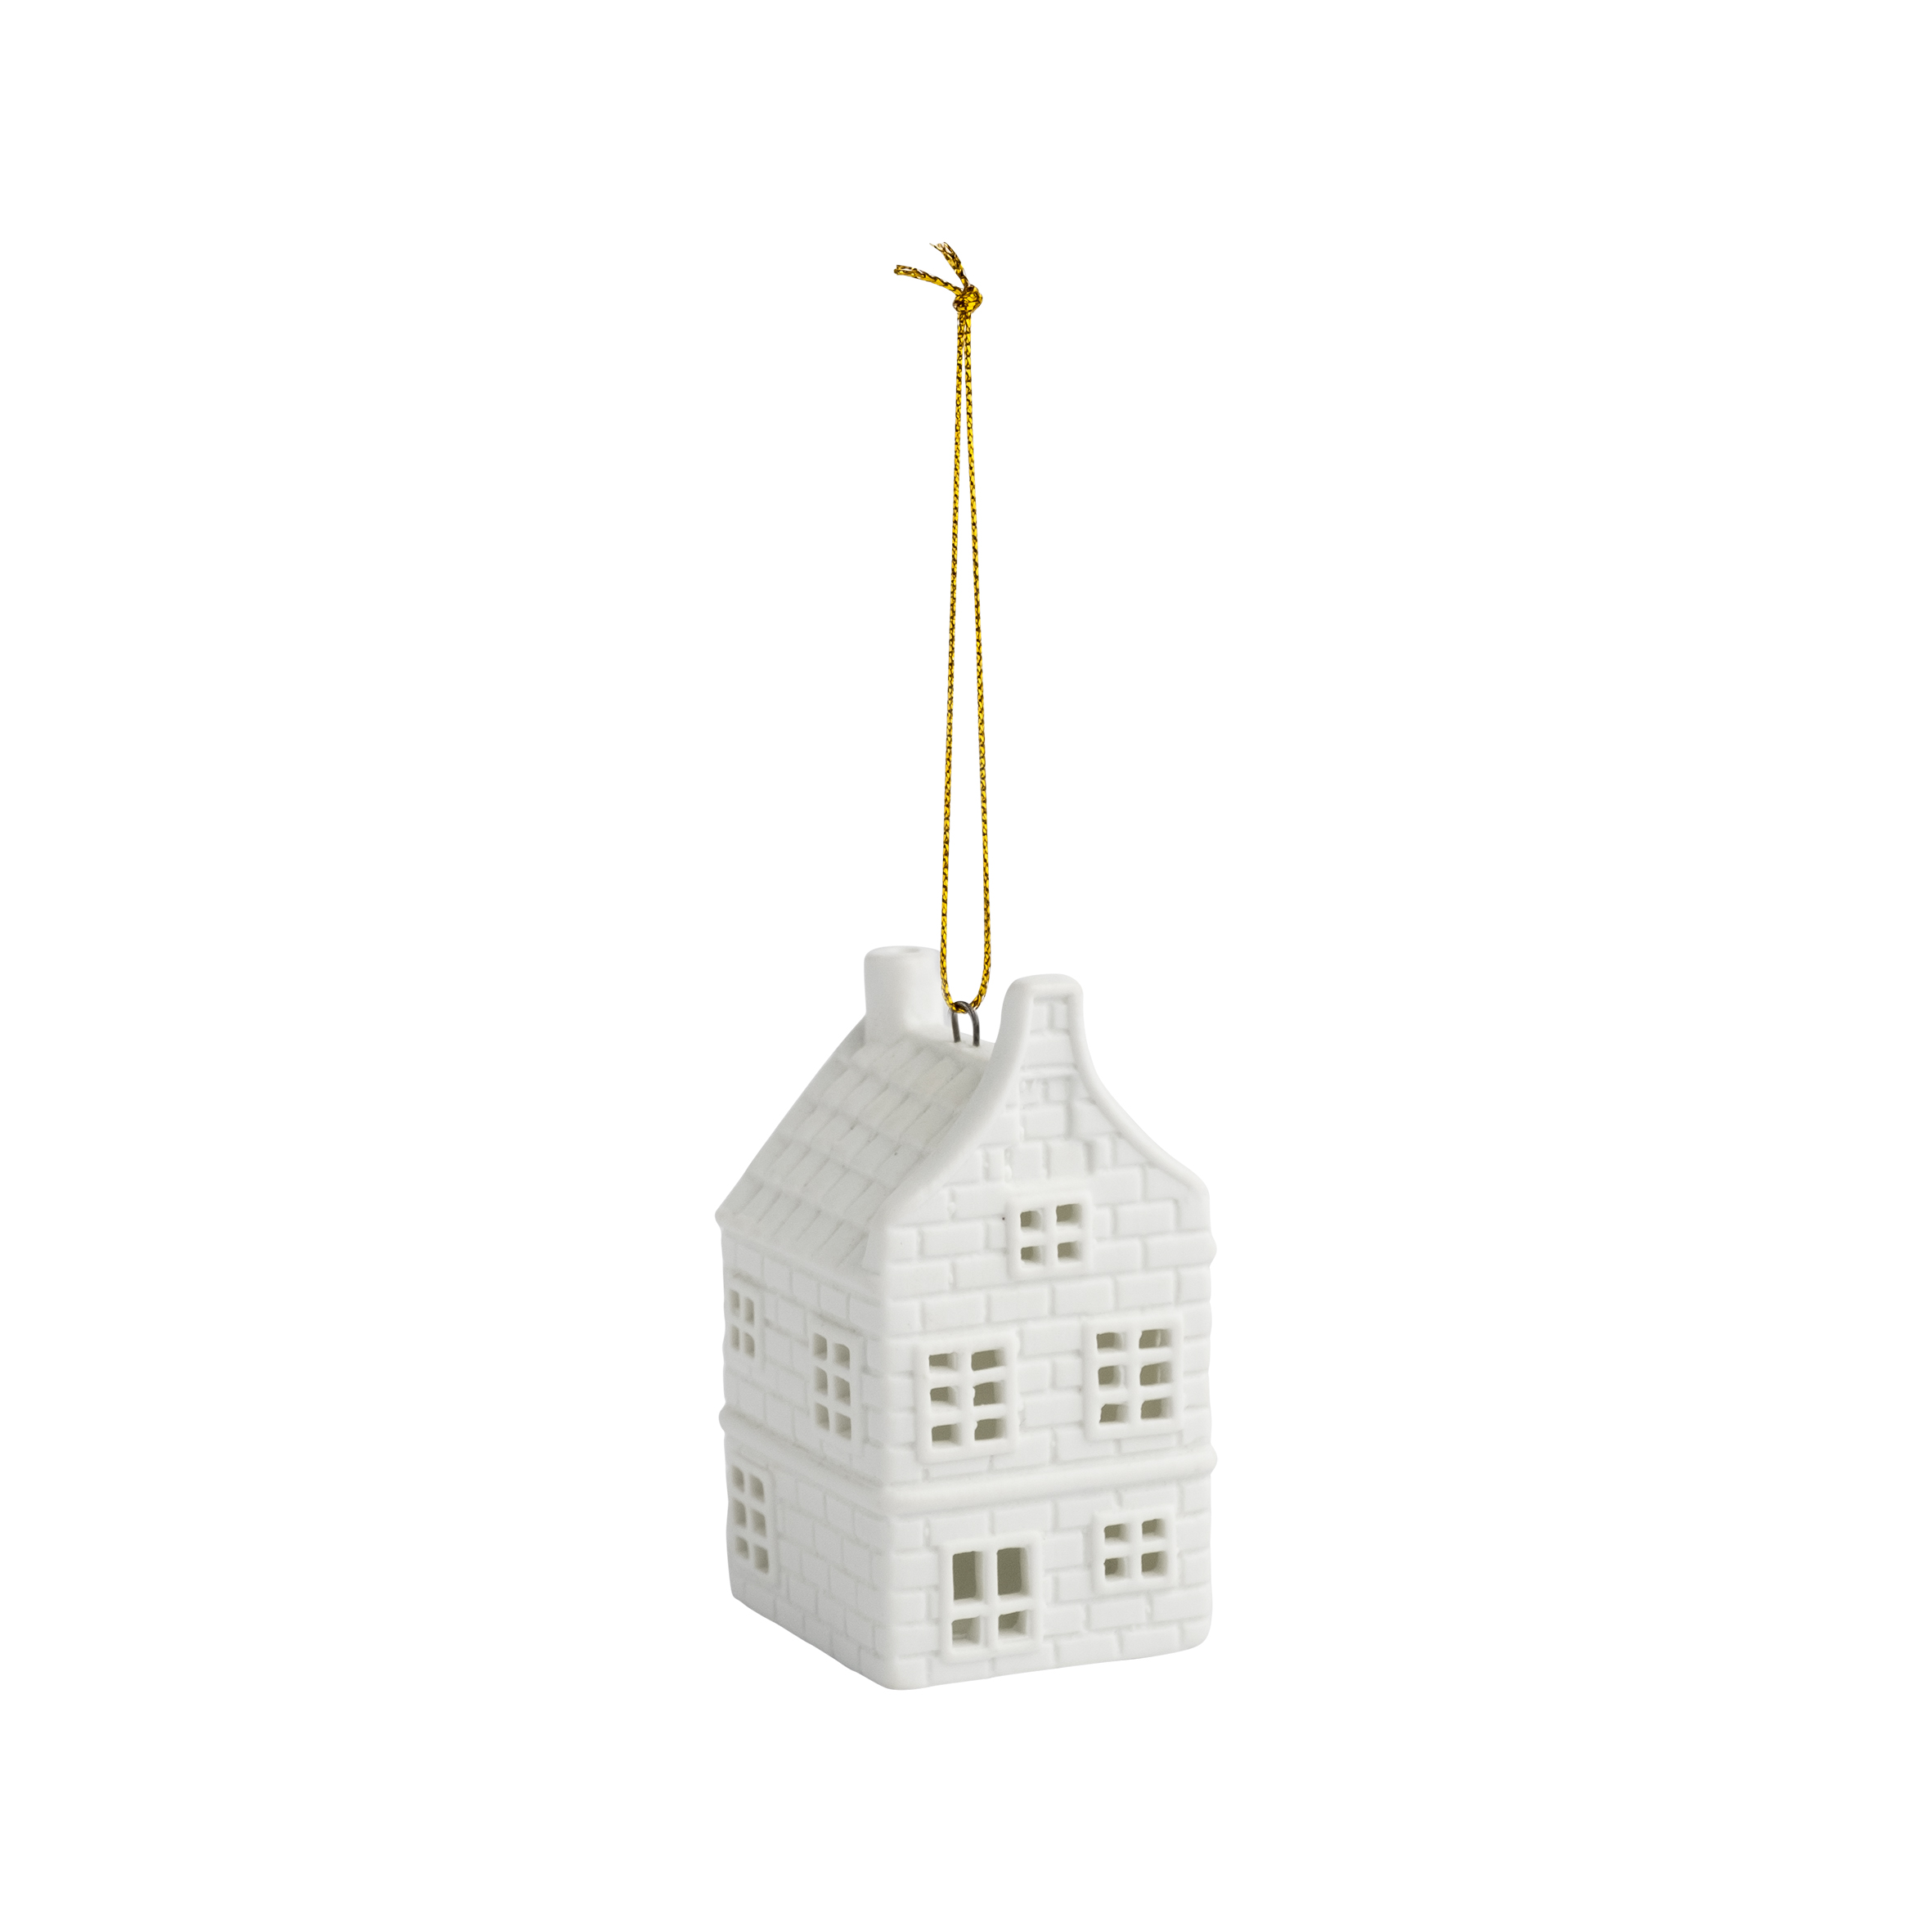 Ornament canal house set of 2